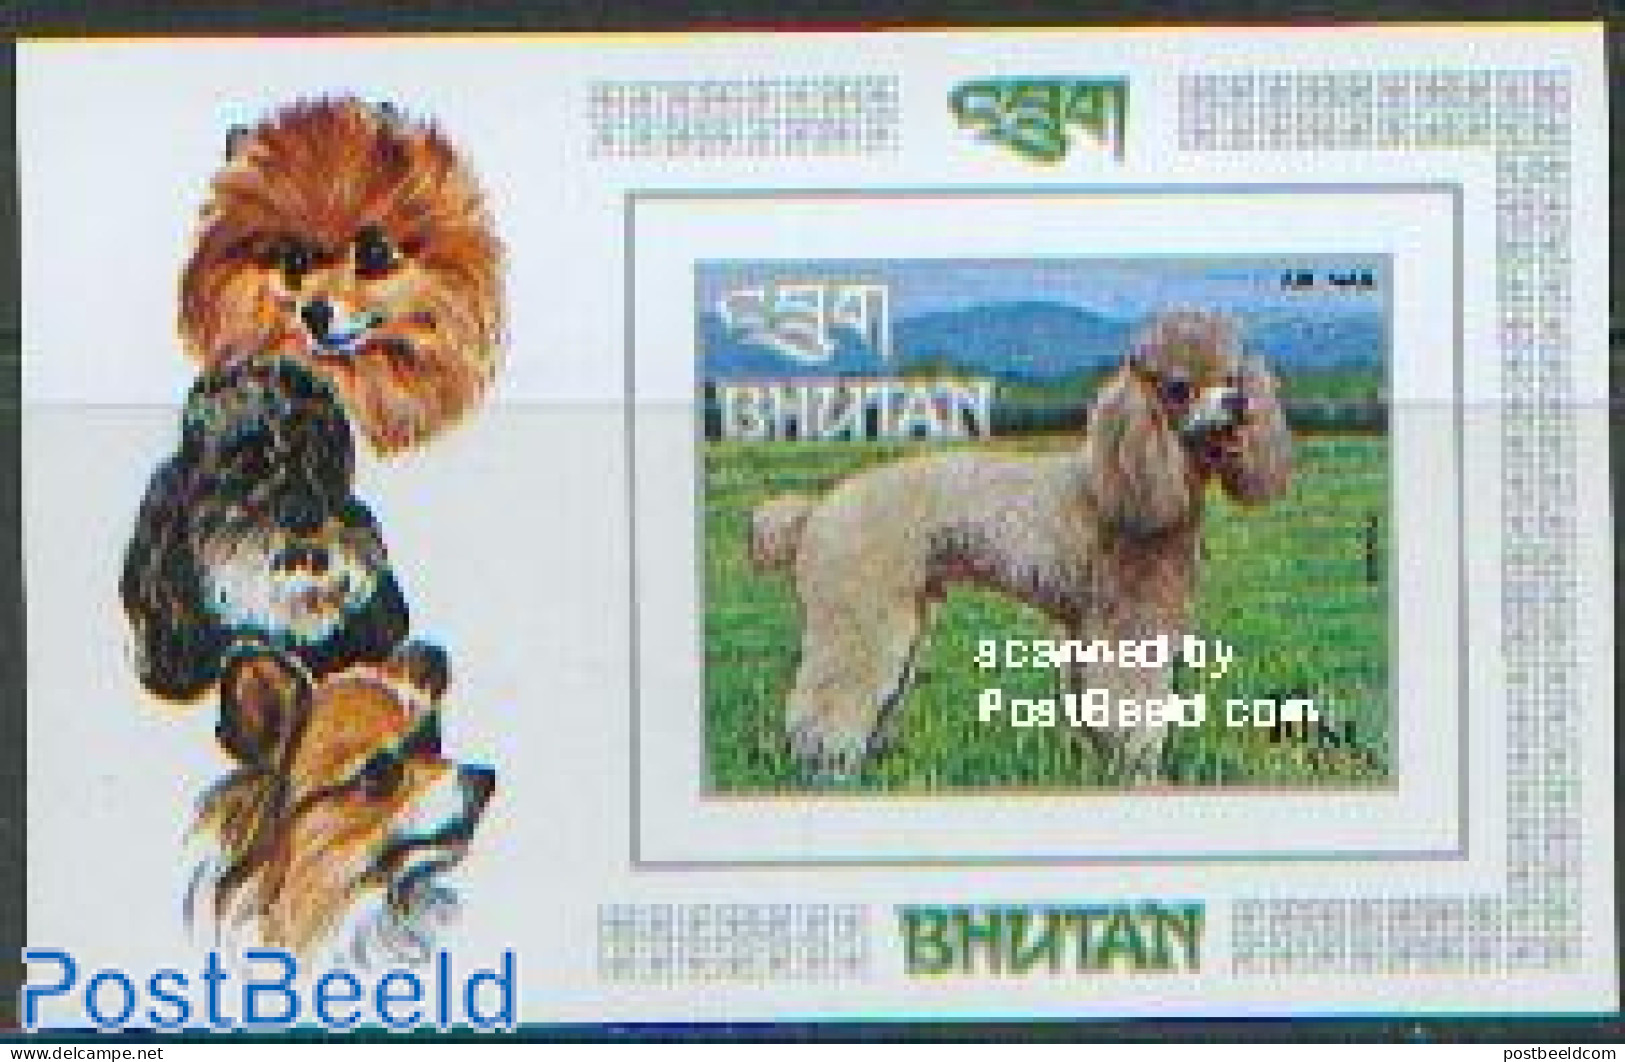 Bhutan 1973 Dogs S/s Imperforated, Mint NH, Nature - Dogs - Bhoutan